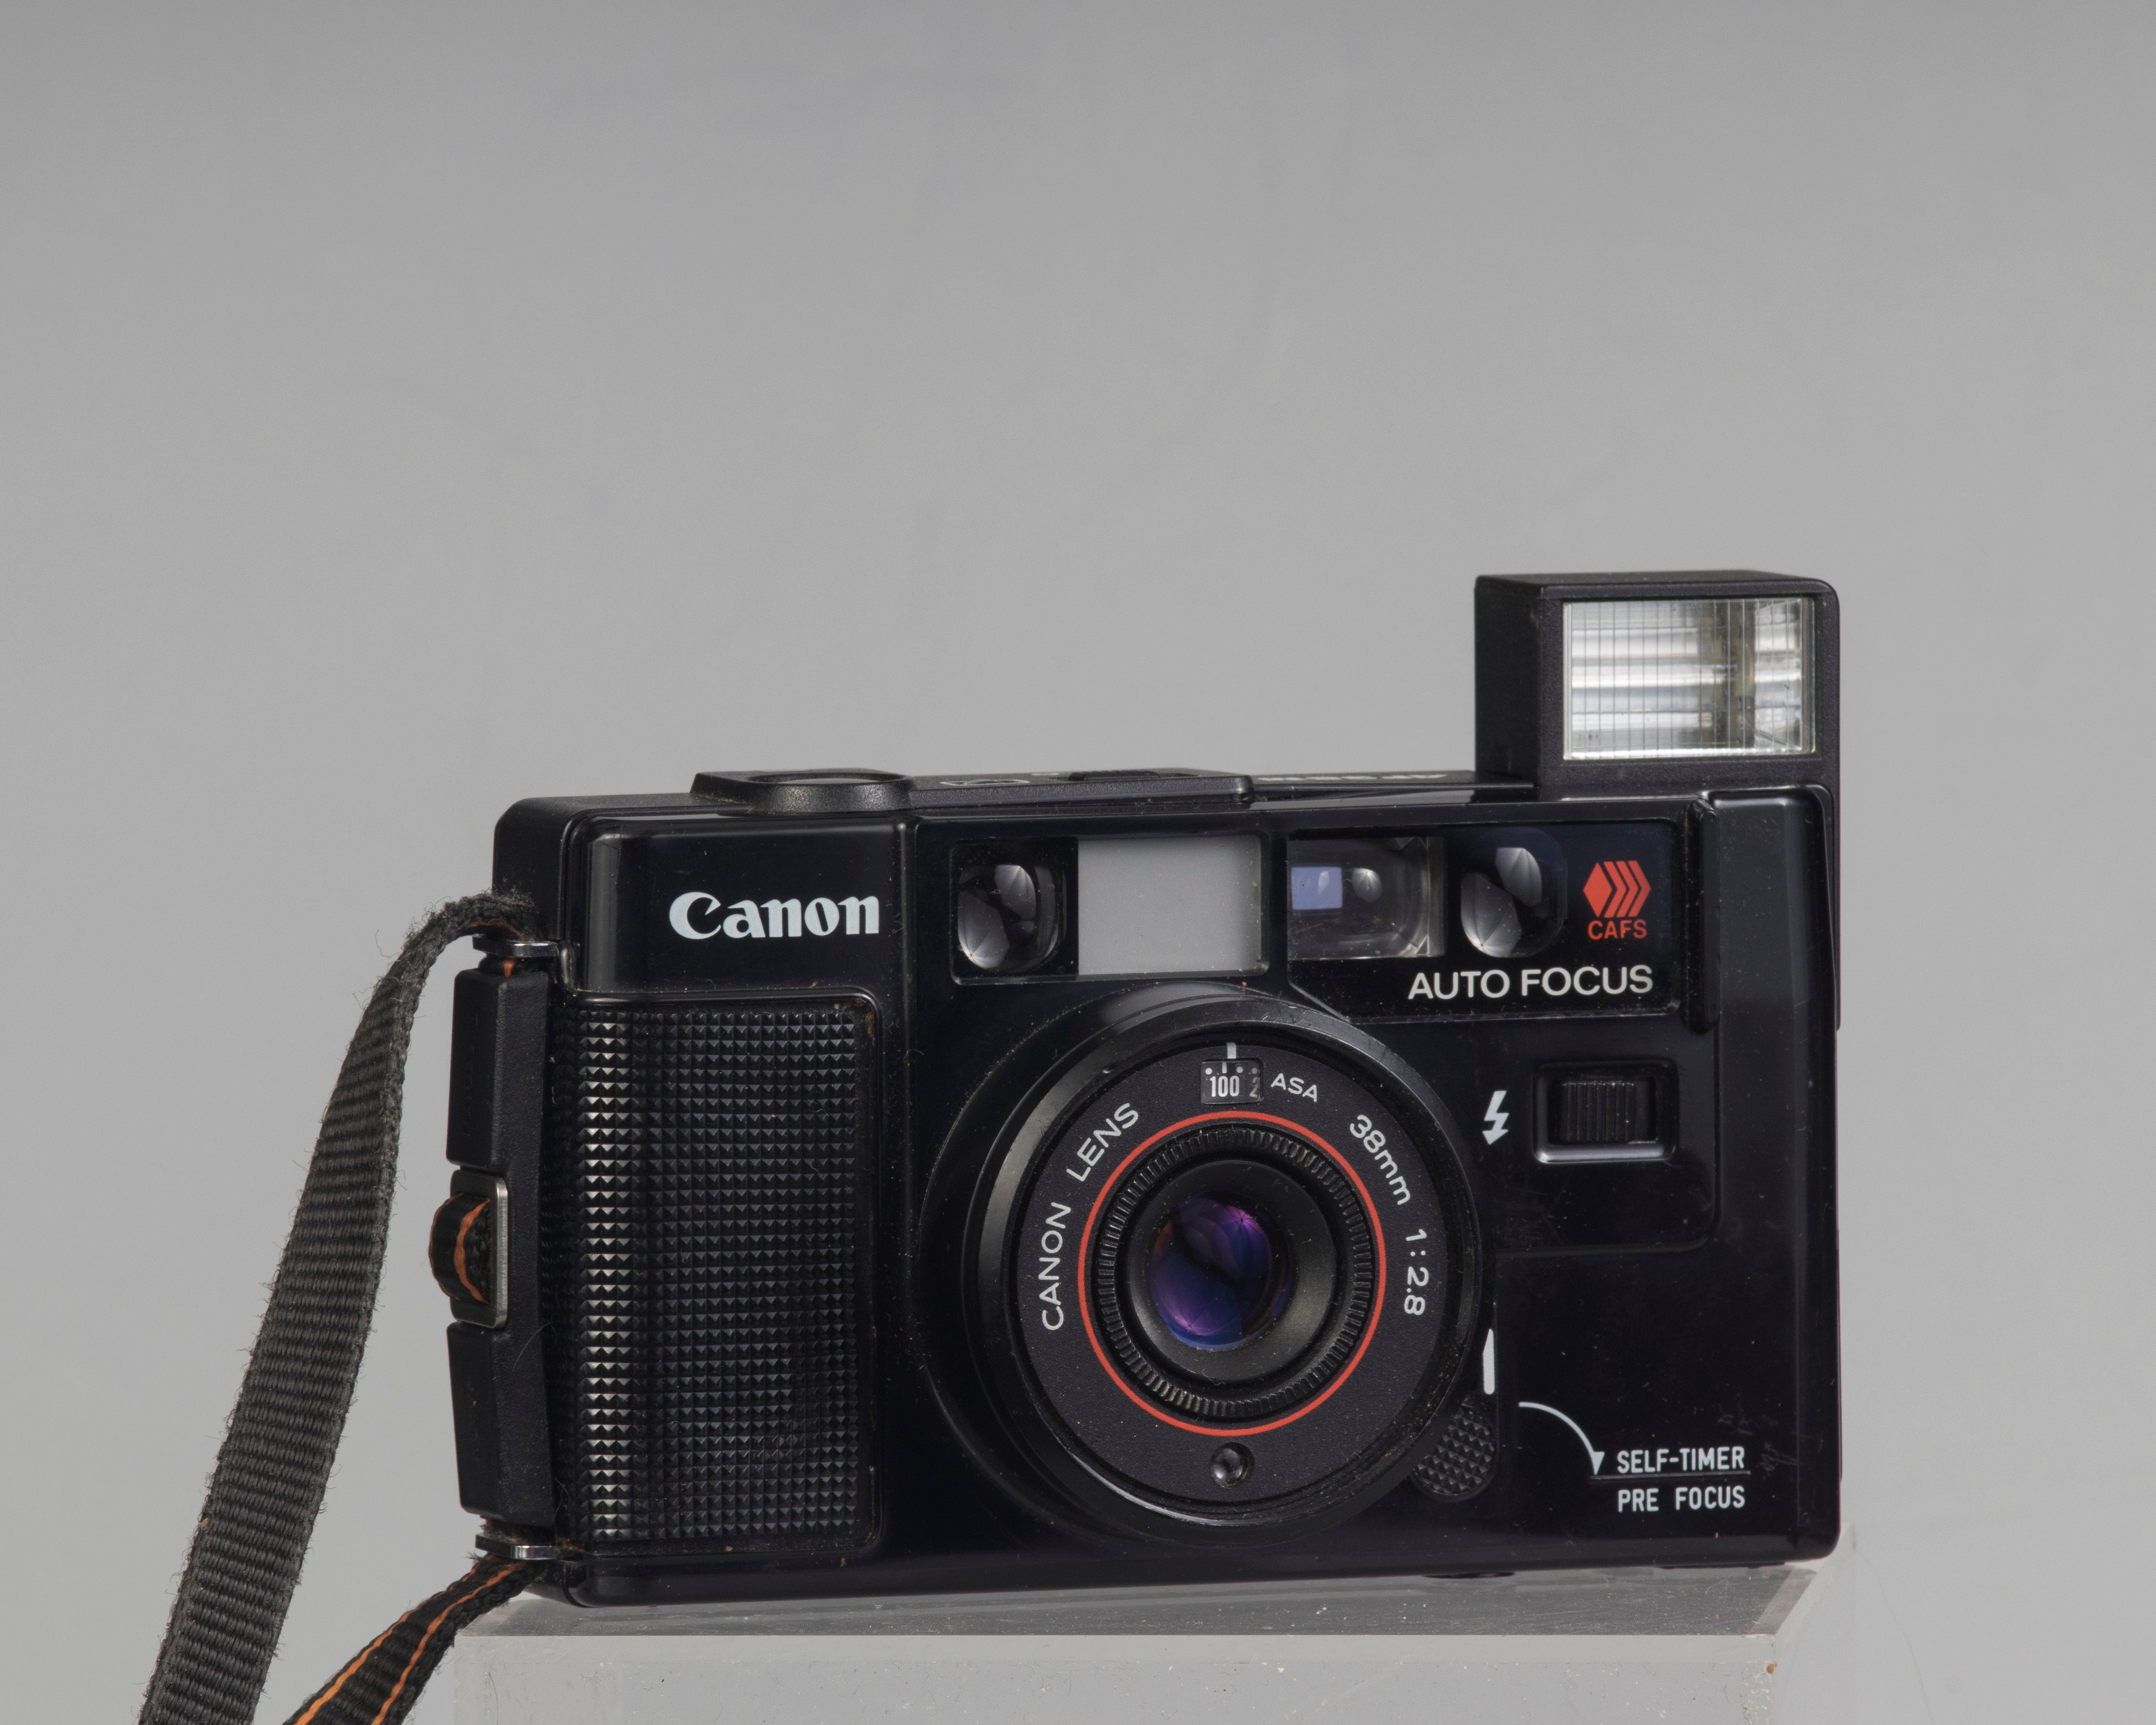 Canon AF35M (aka Sure Shot or Autoboy) 35mm film point-and-shoot w/case